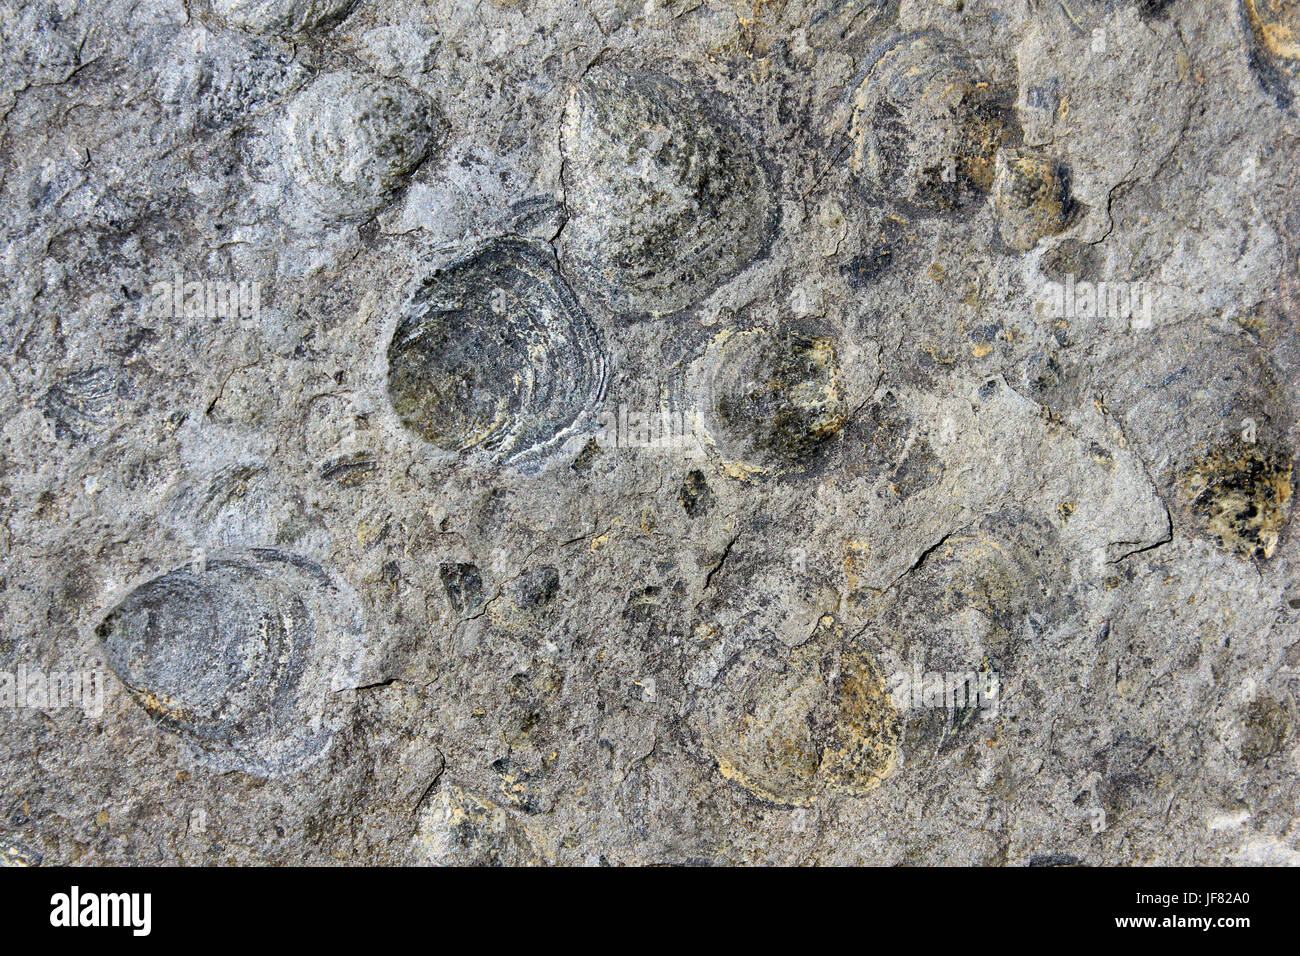 Fossil Brachiopods from the Upper Cambrian, Snowdonia, Wales Stock Photo